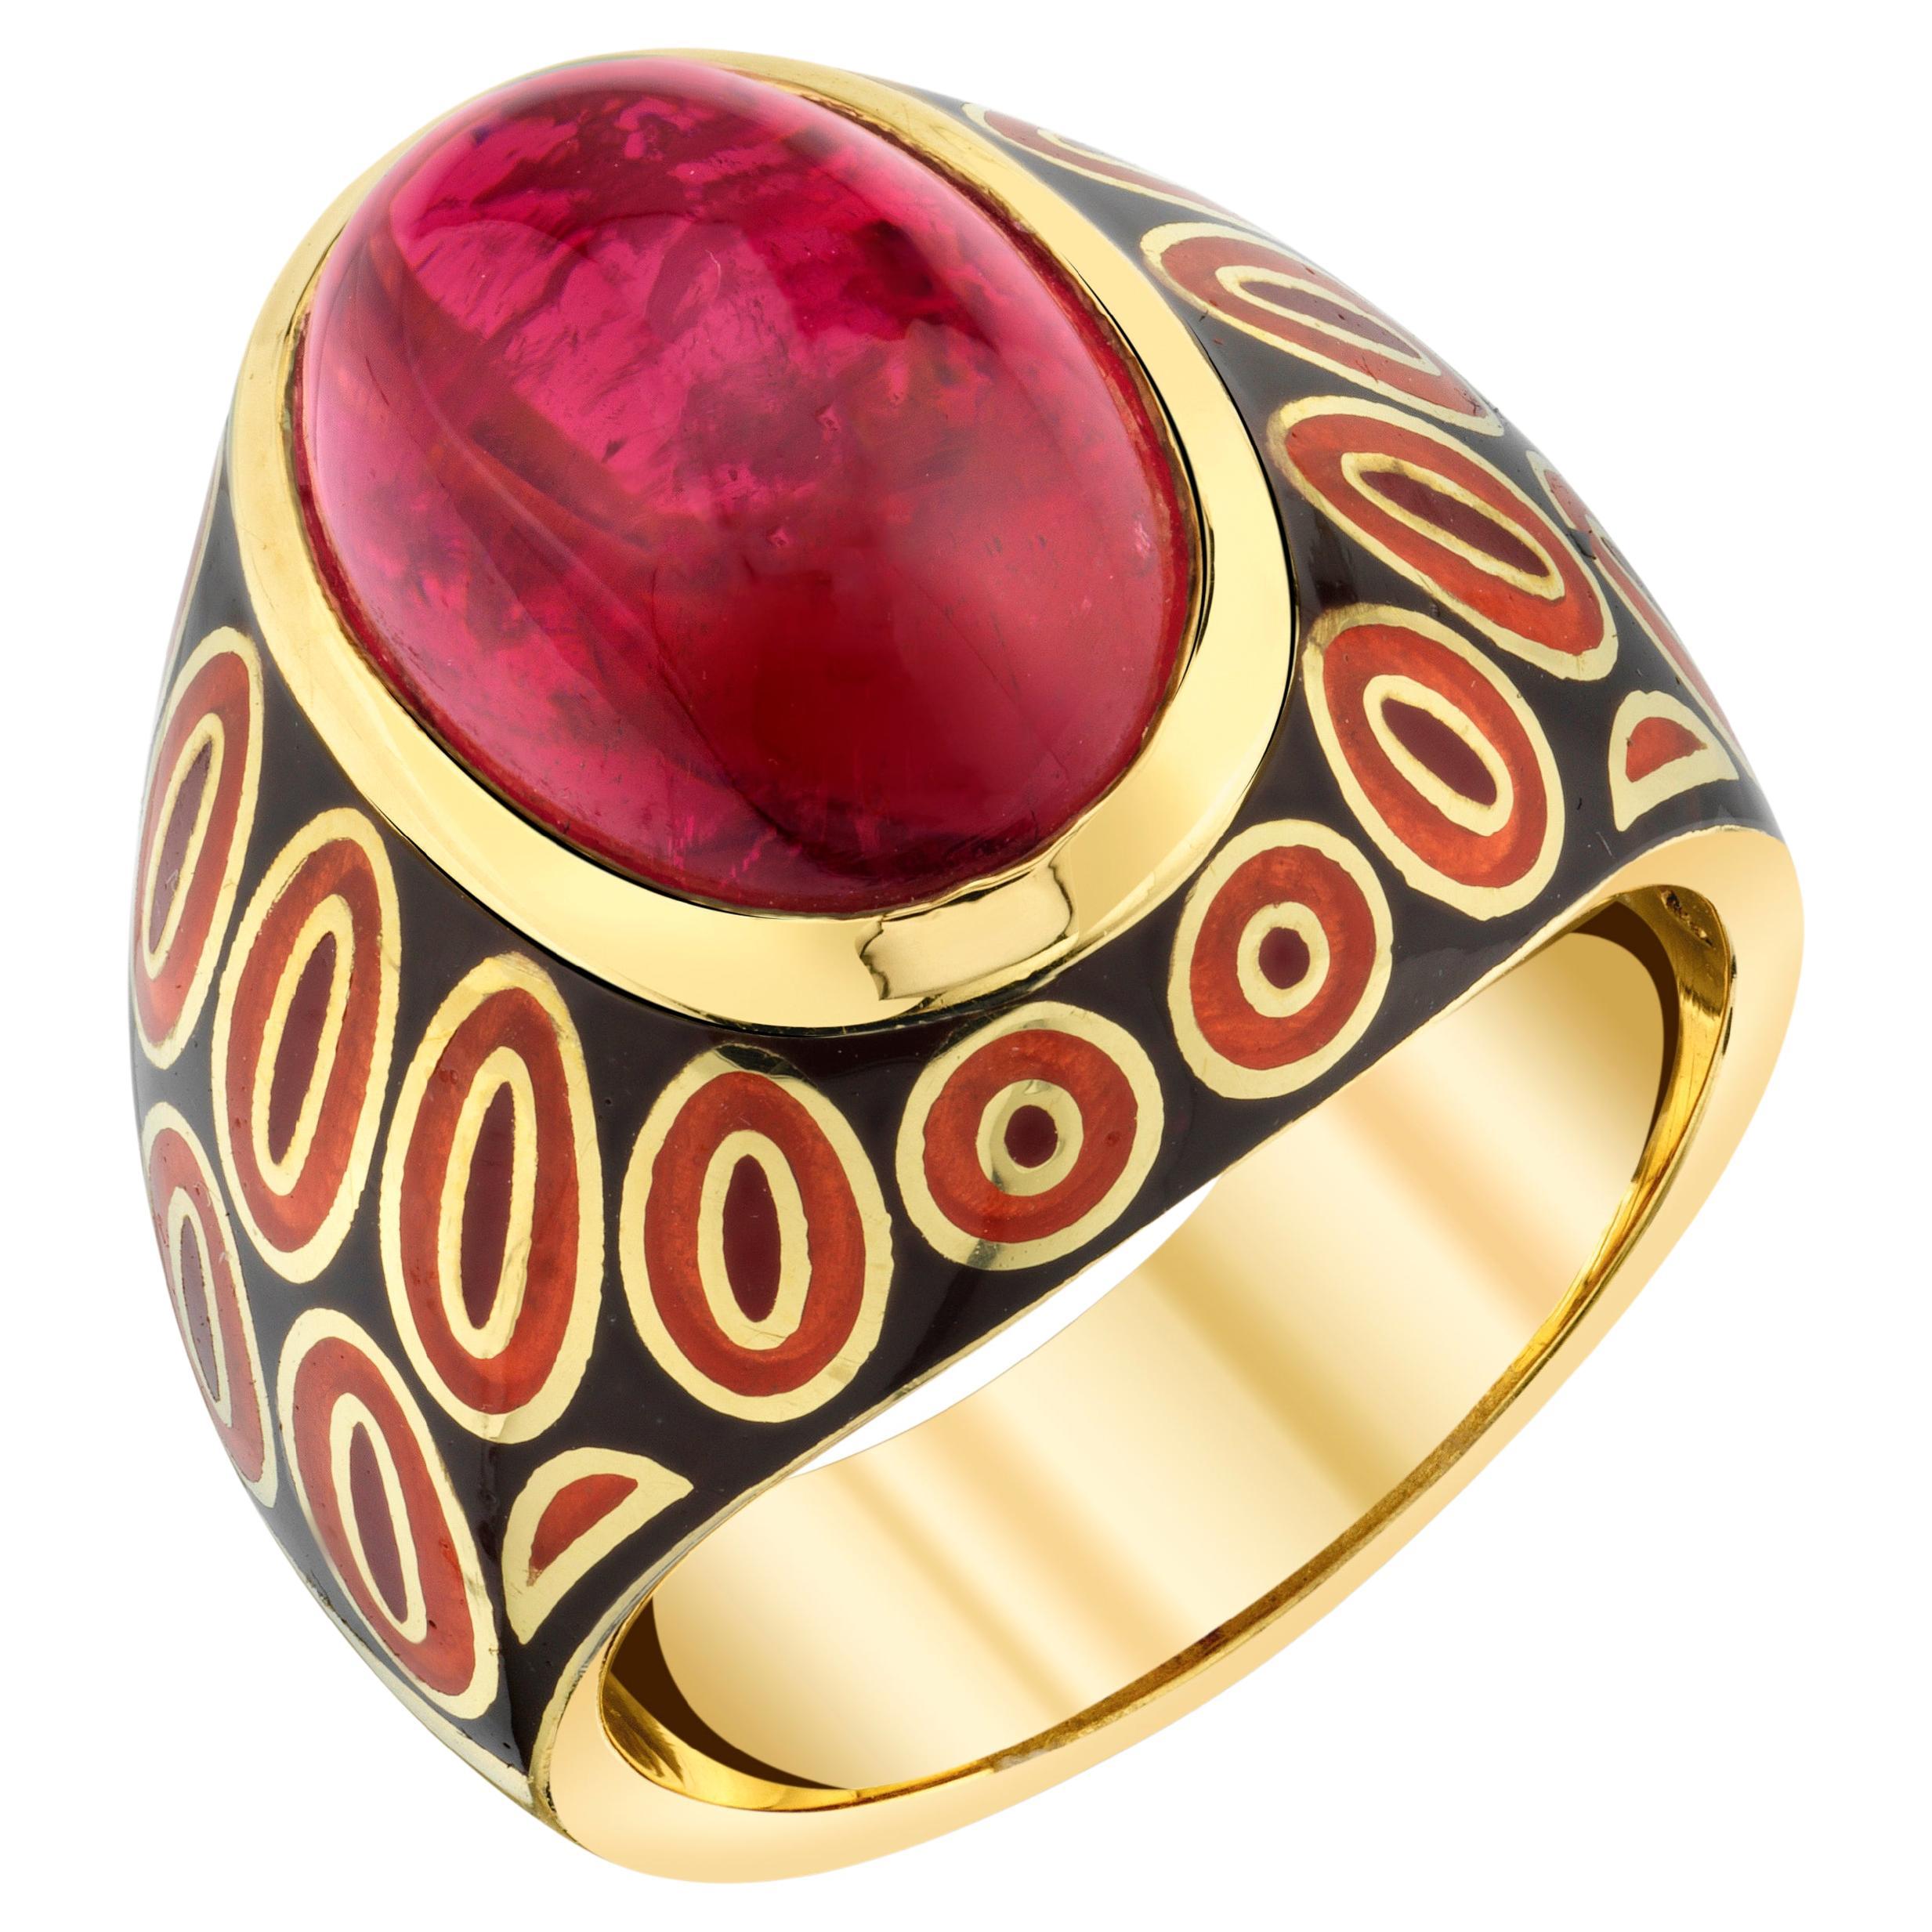 7.60 Carat Rubellite Tourmaline Cabochon and Enamel Dome Ring in 18k Gold For Sale